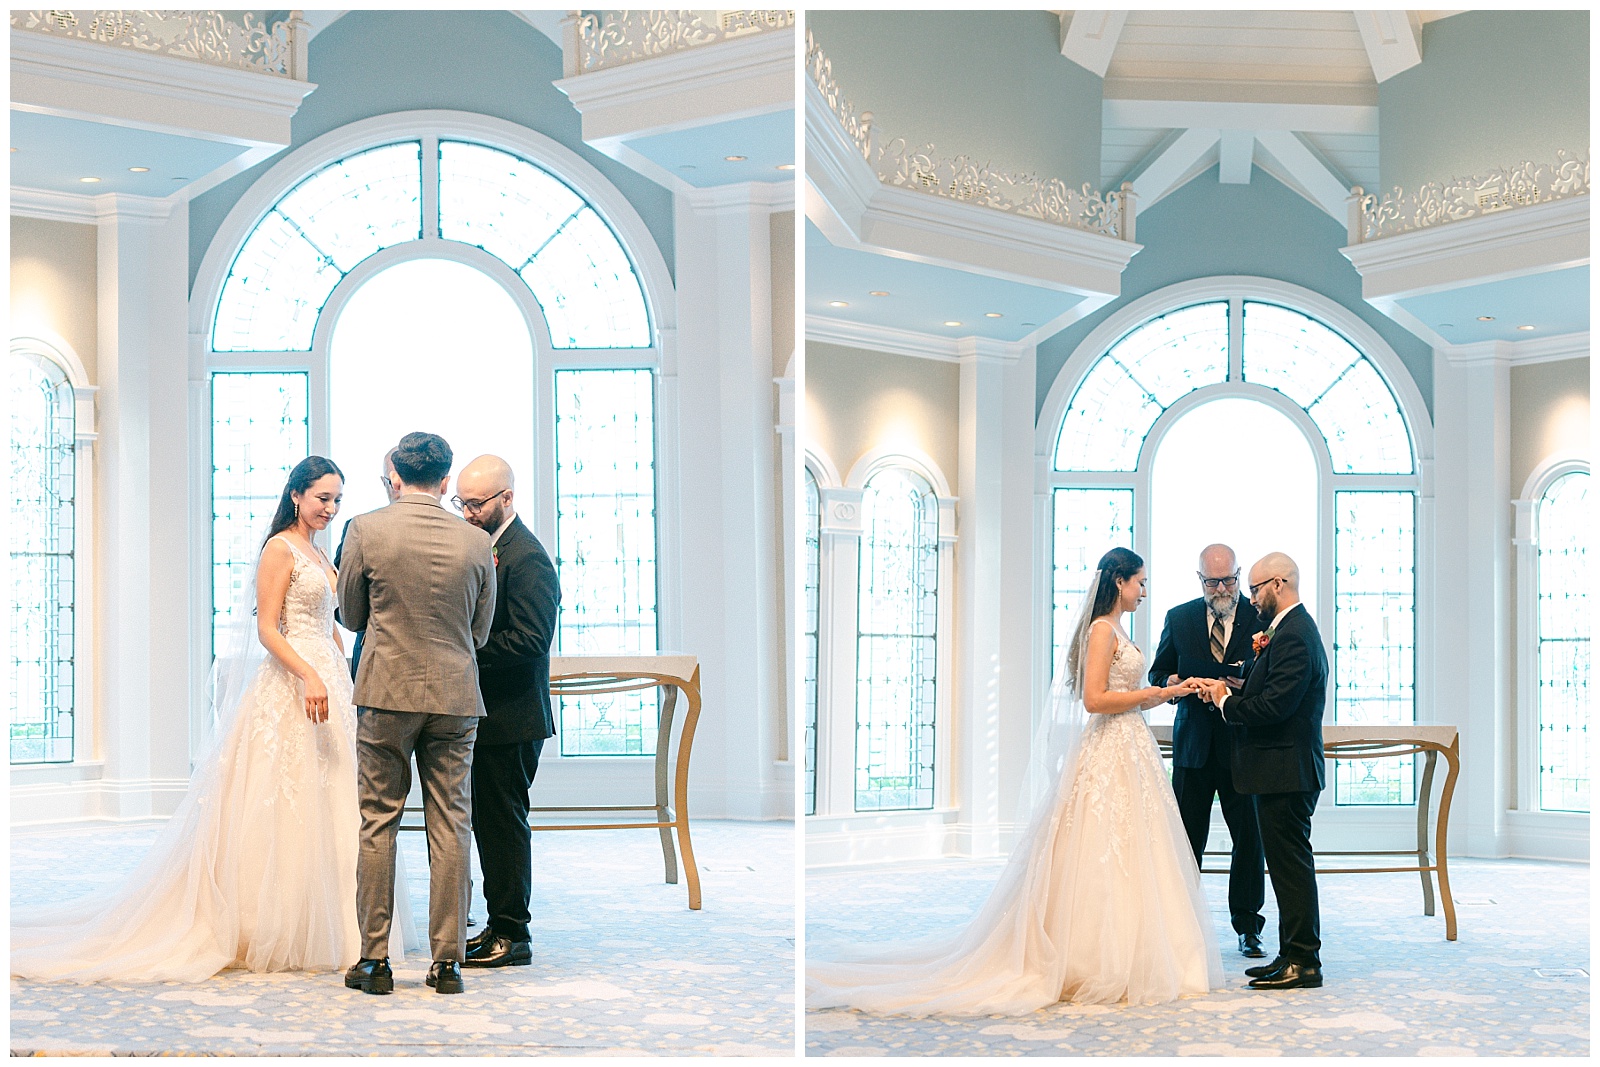 Left: Presentation of the rings.
Right: Bride and groom exchange rings during wedding ceremony.
By Elizabeth Kane Photography in Orlando Florida